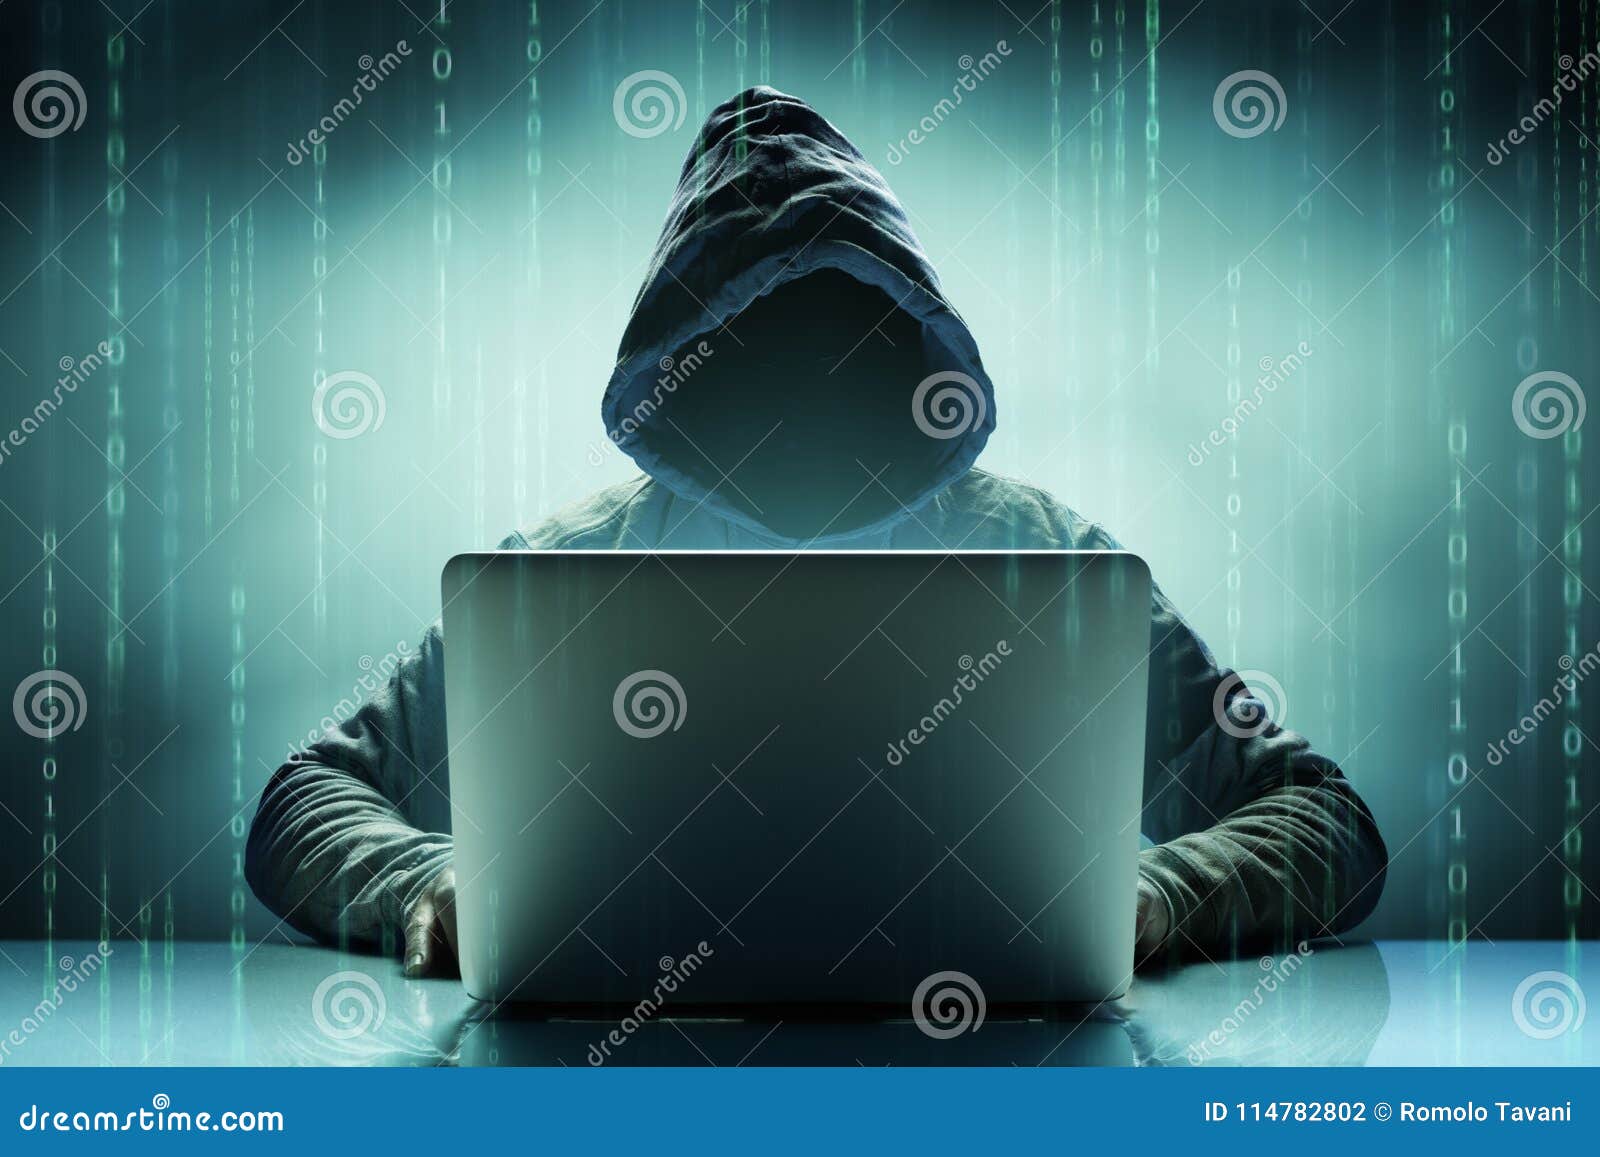 faceless anonymous computer hacker with laptop